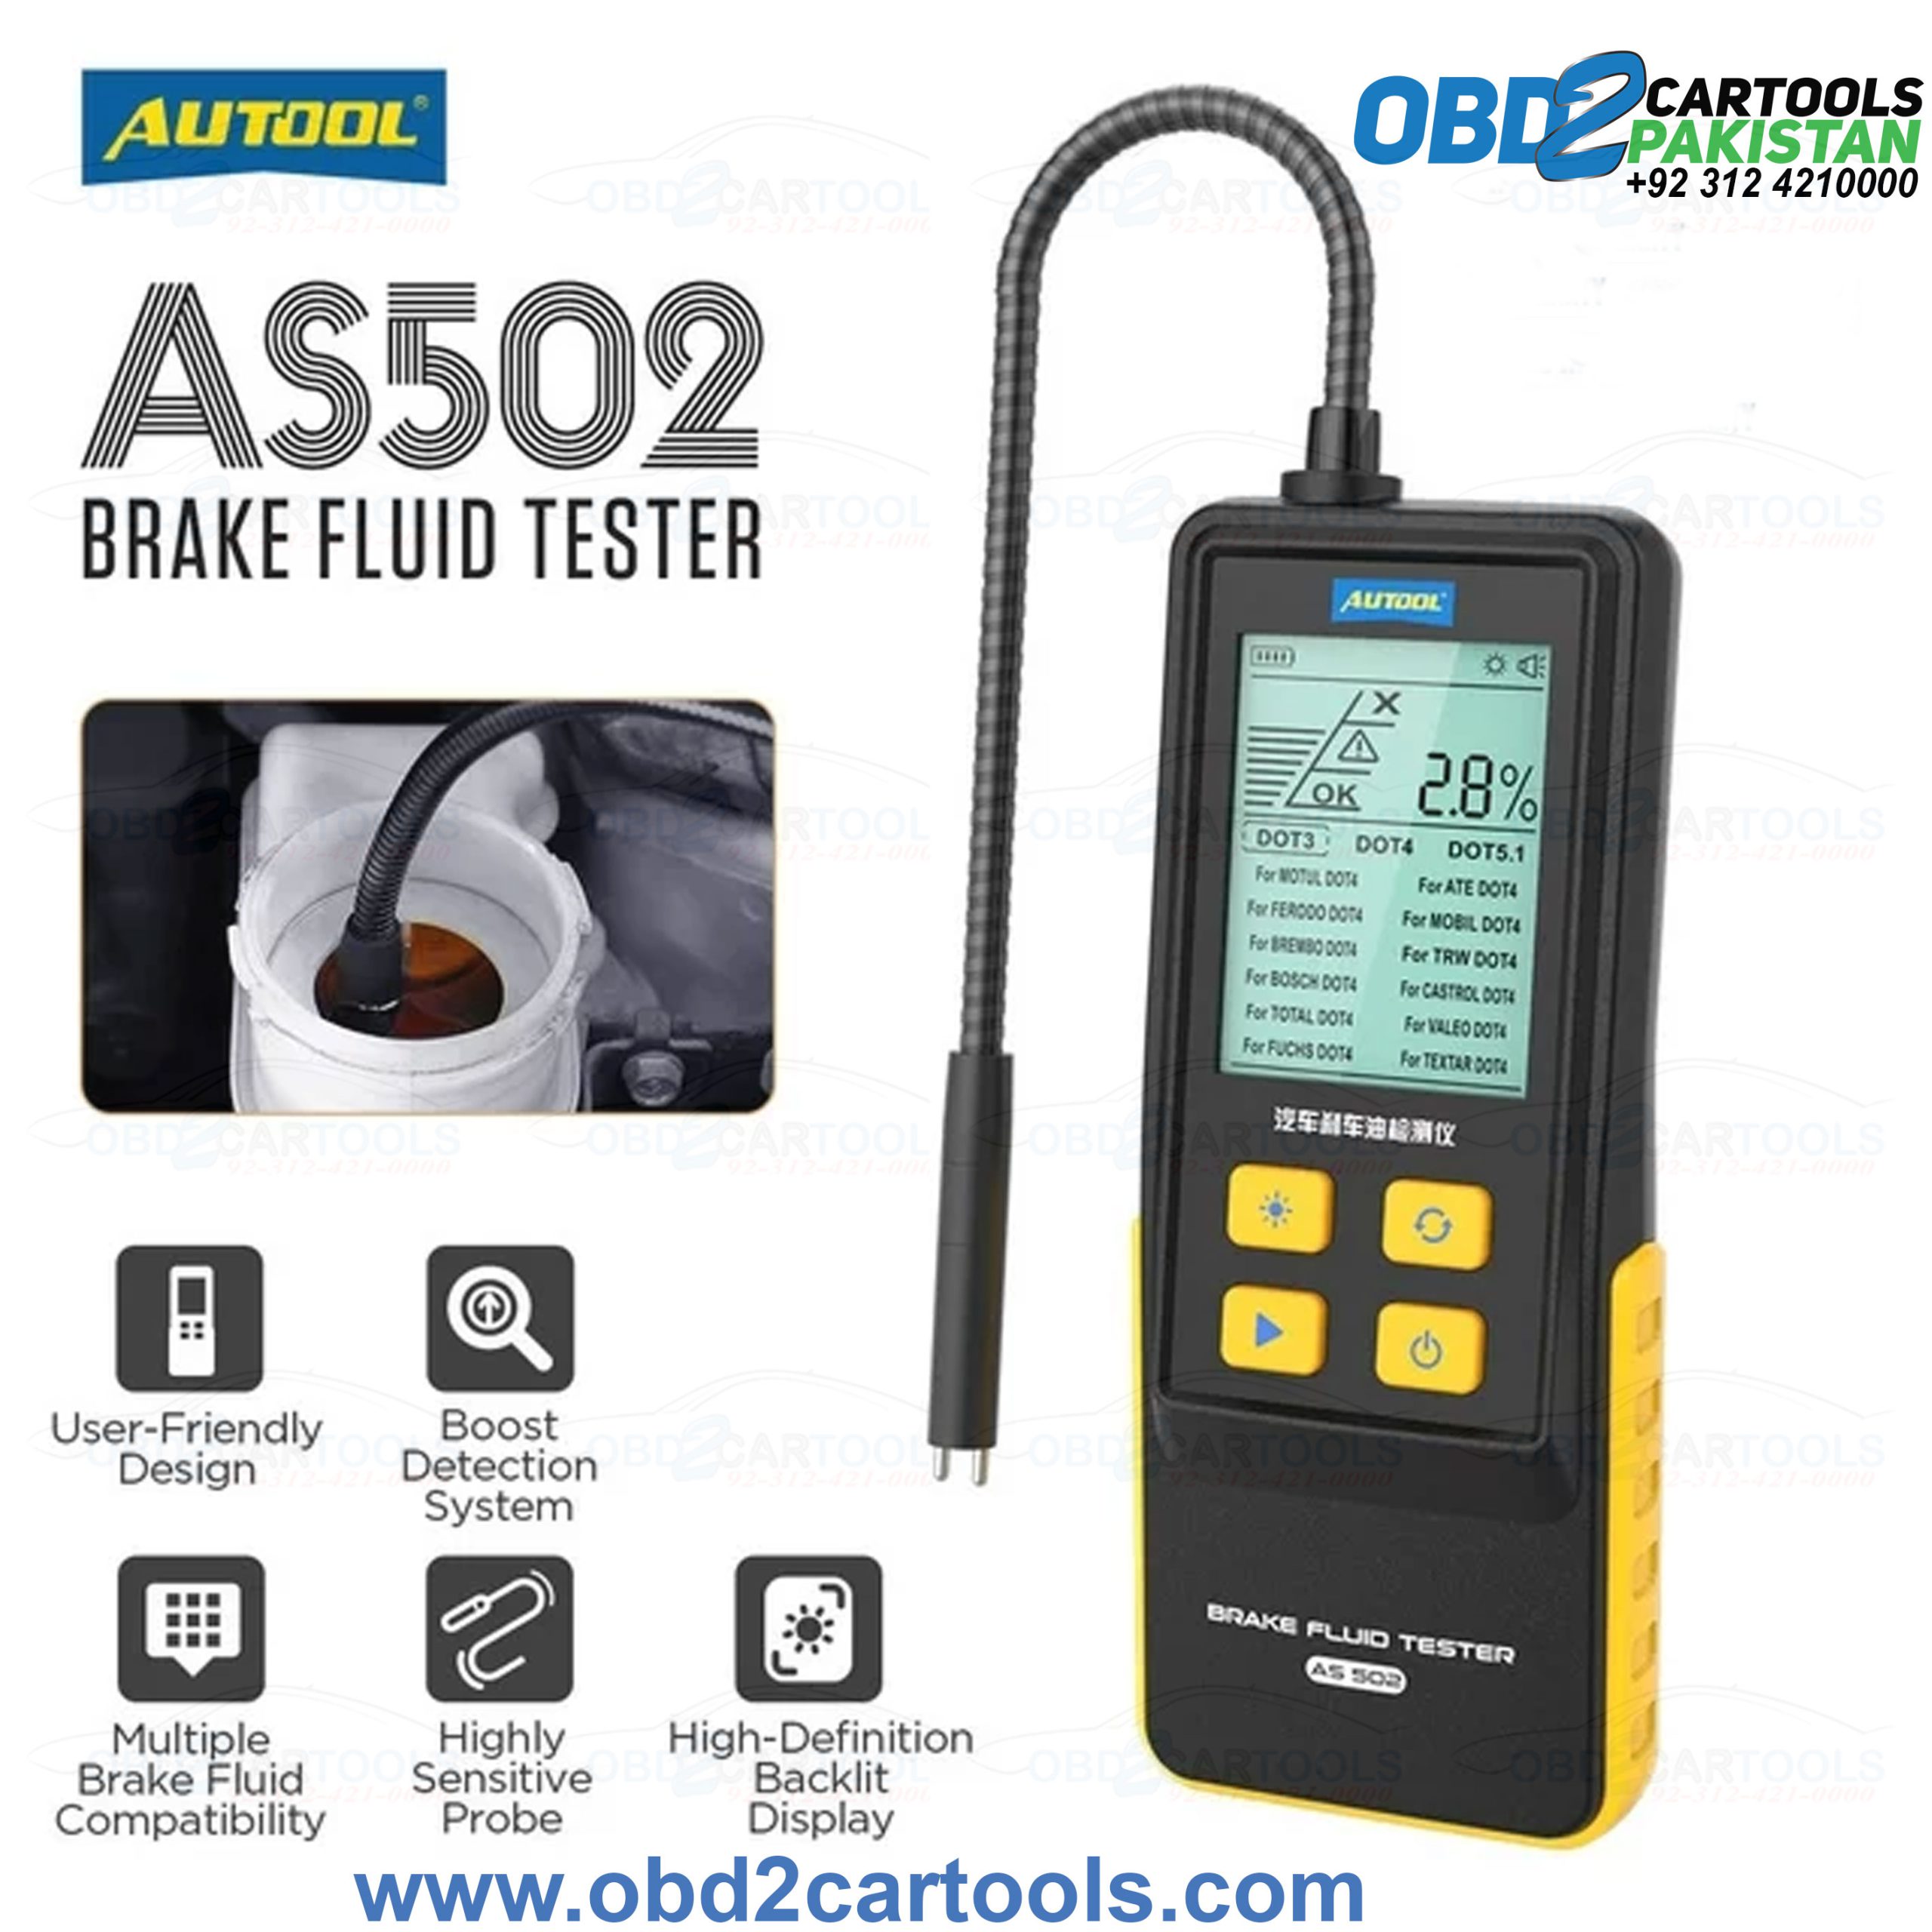 Product image for AUTOOL AS502 Car Brake Fluid Tester Car Oil Quality Water Content Percentage Brake Oil Testing For Automotive DOT3 DOT4 DOT5.1